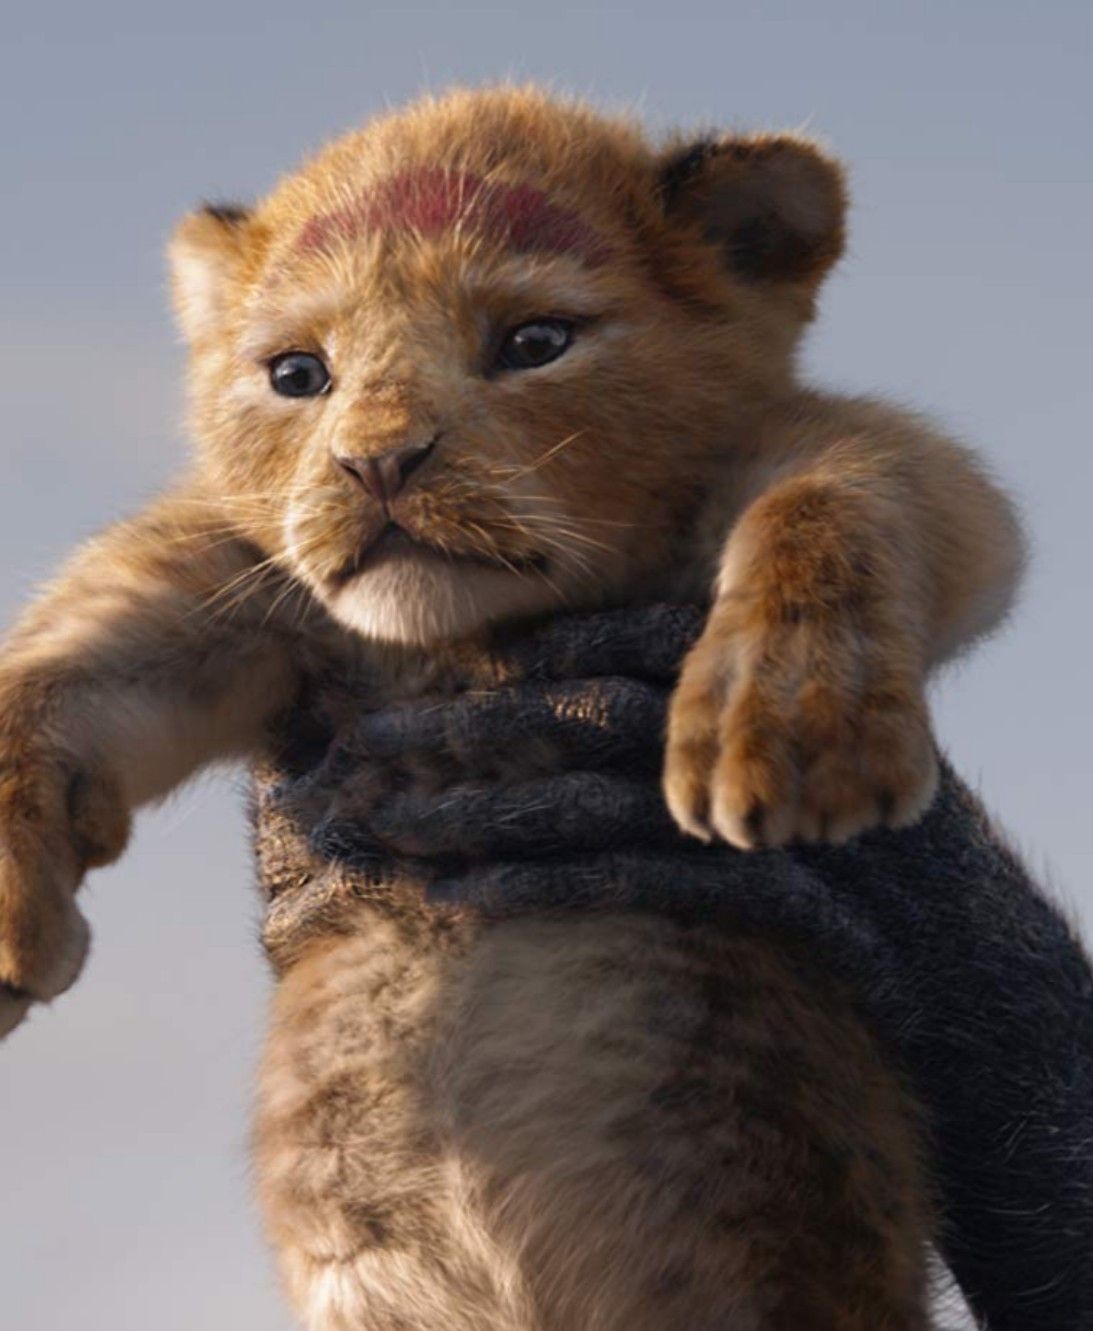 vertical-the-lion-king-remake-baby-simba